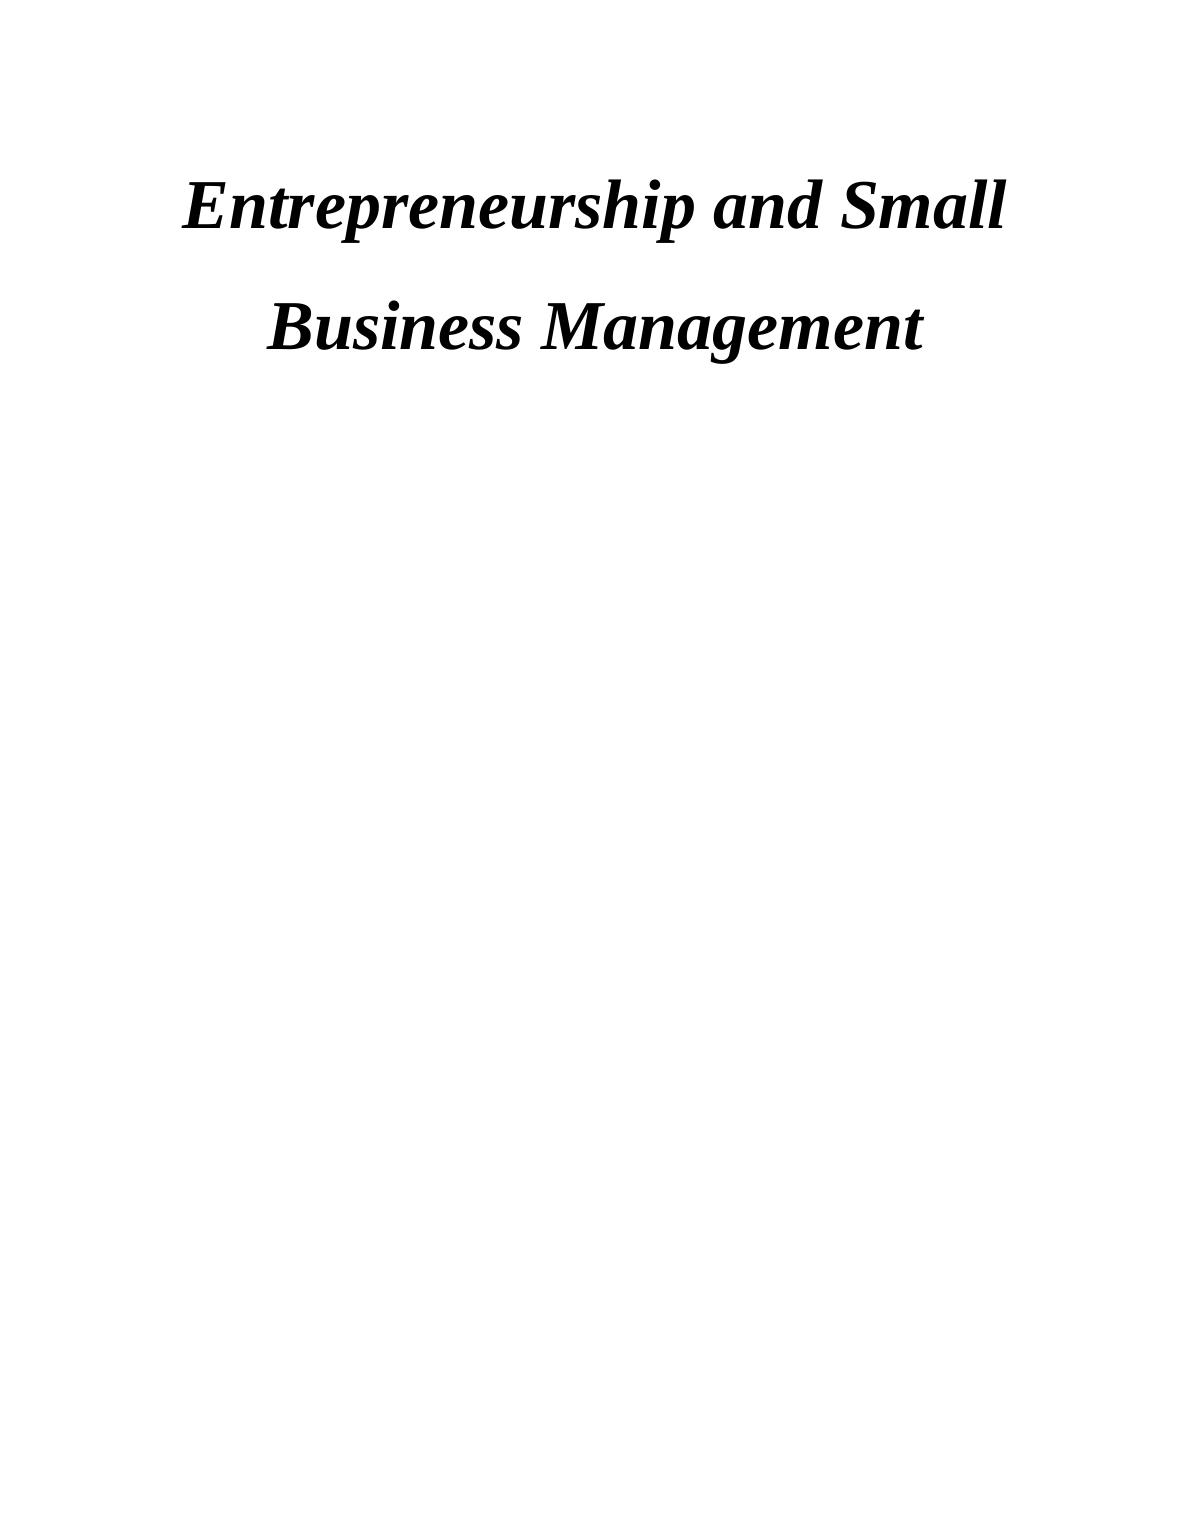 Entrepreneurship and Small Business Management Assignment (PDF)_1